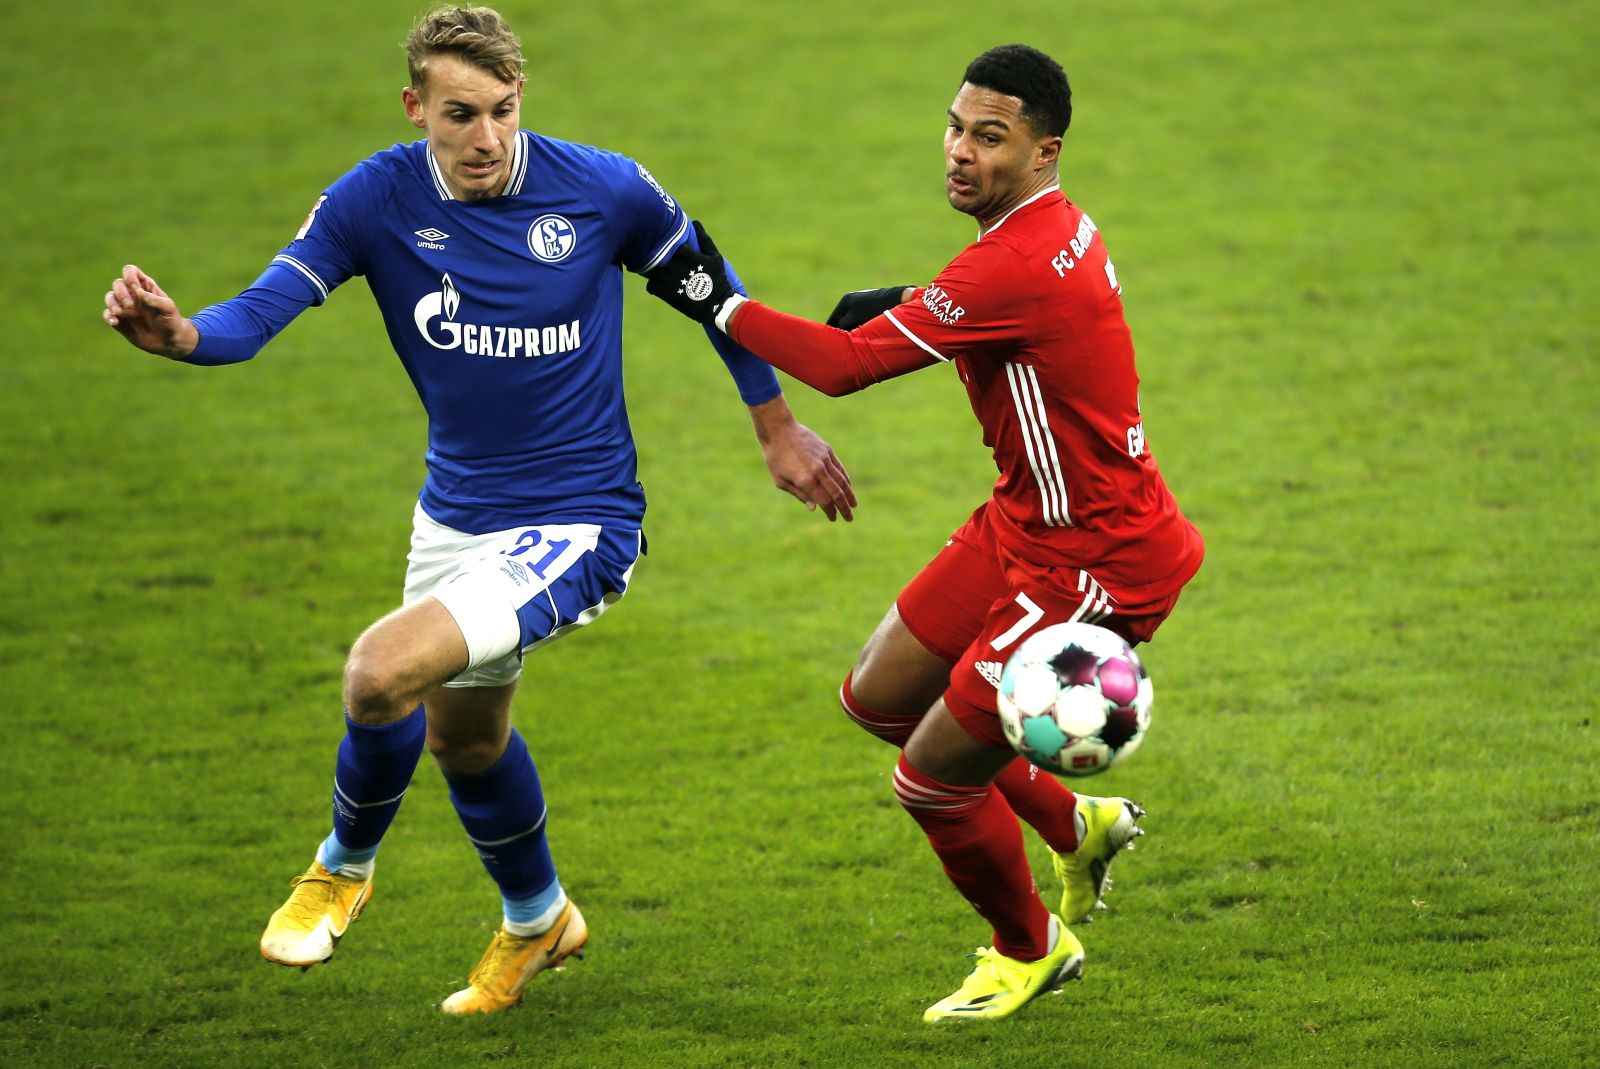 epa08962255 Schalke's Timo Becker (L) in action against Bayern's Serge Gnabry (R) during the German Bundesliga soccer match between FC Schalke 04 and FC Bayern Munich in Gelsenkirchen, Germany, 24 January 2021.  EPA/LEON KUEGELER / POOL DFL regulations prohibit any use of photographs as image sequences and/or quasi-video.